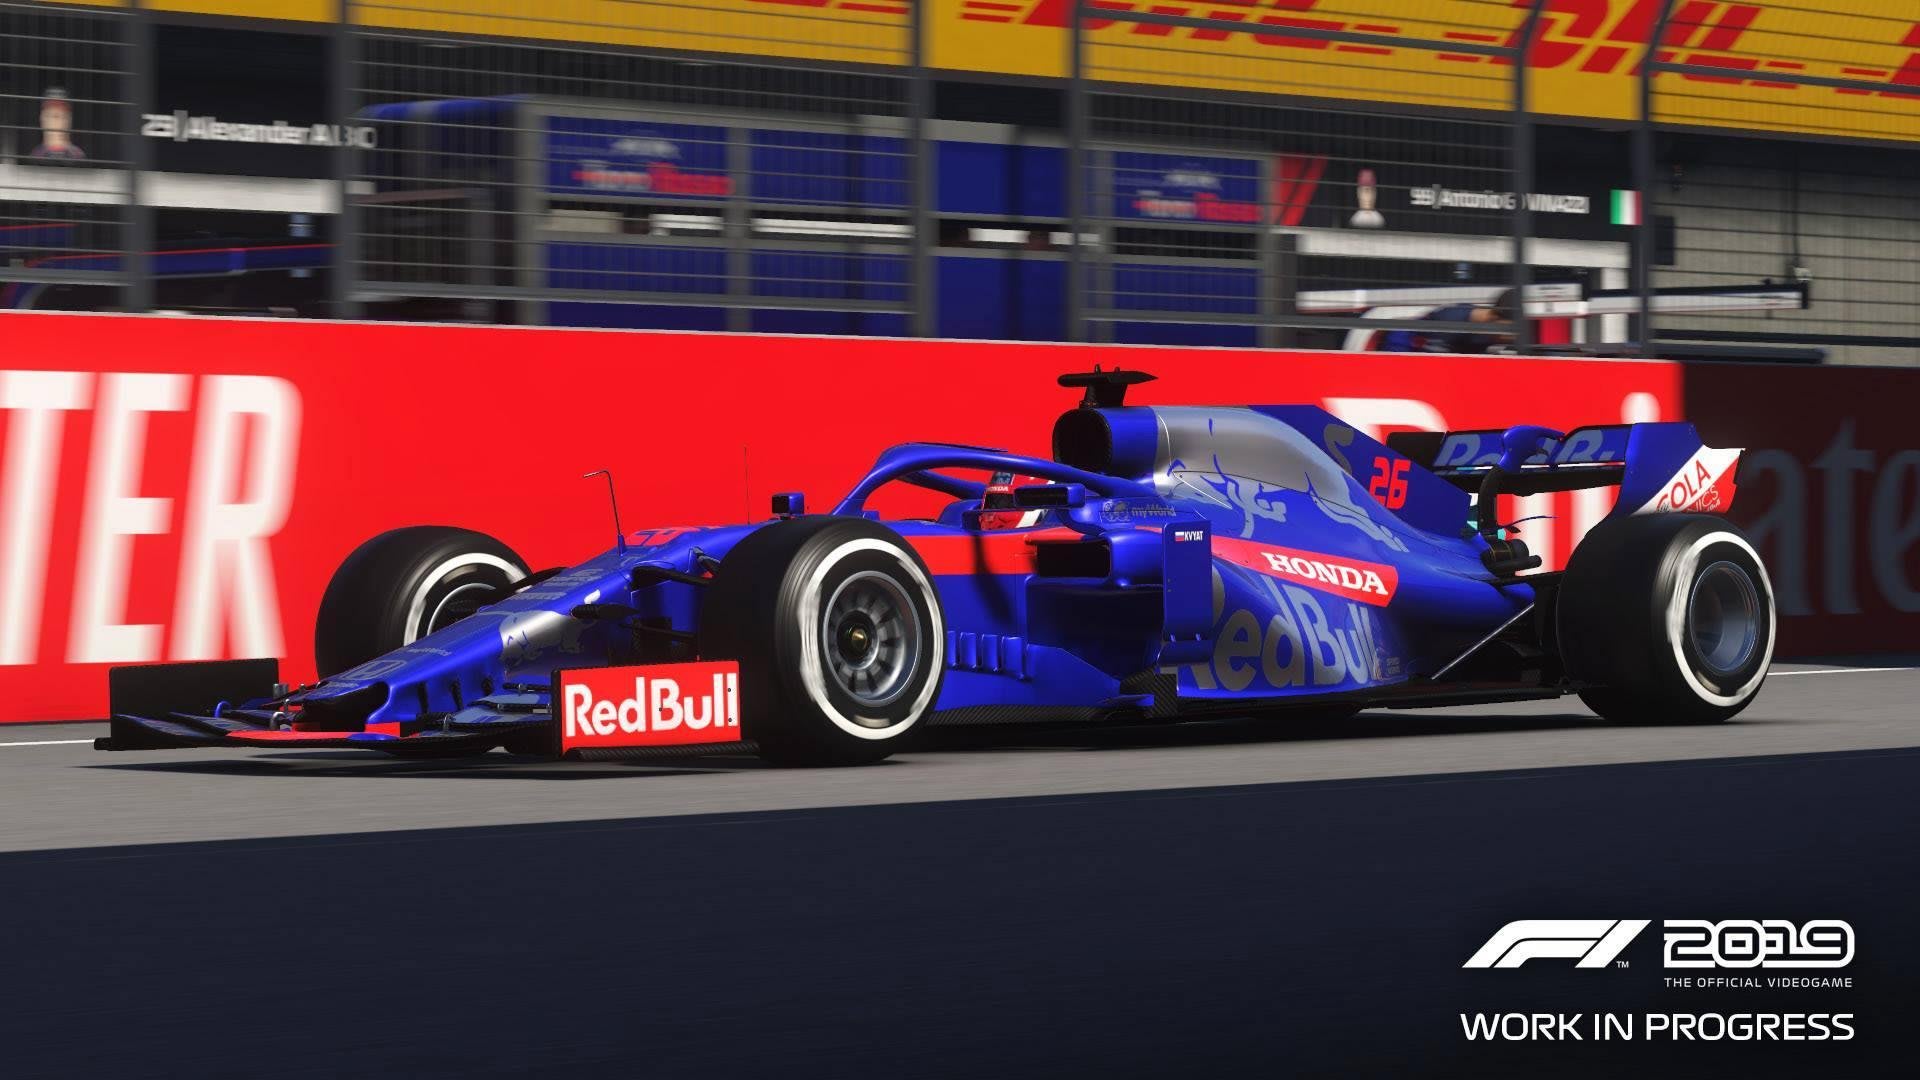 F1 2019 tips: to get off to a great start